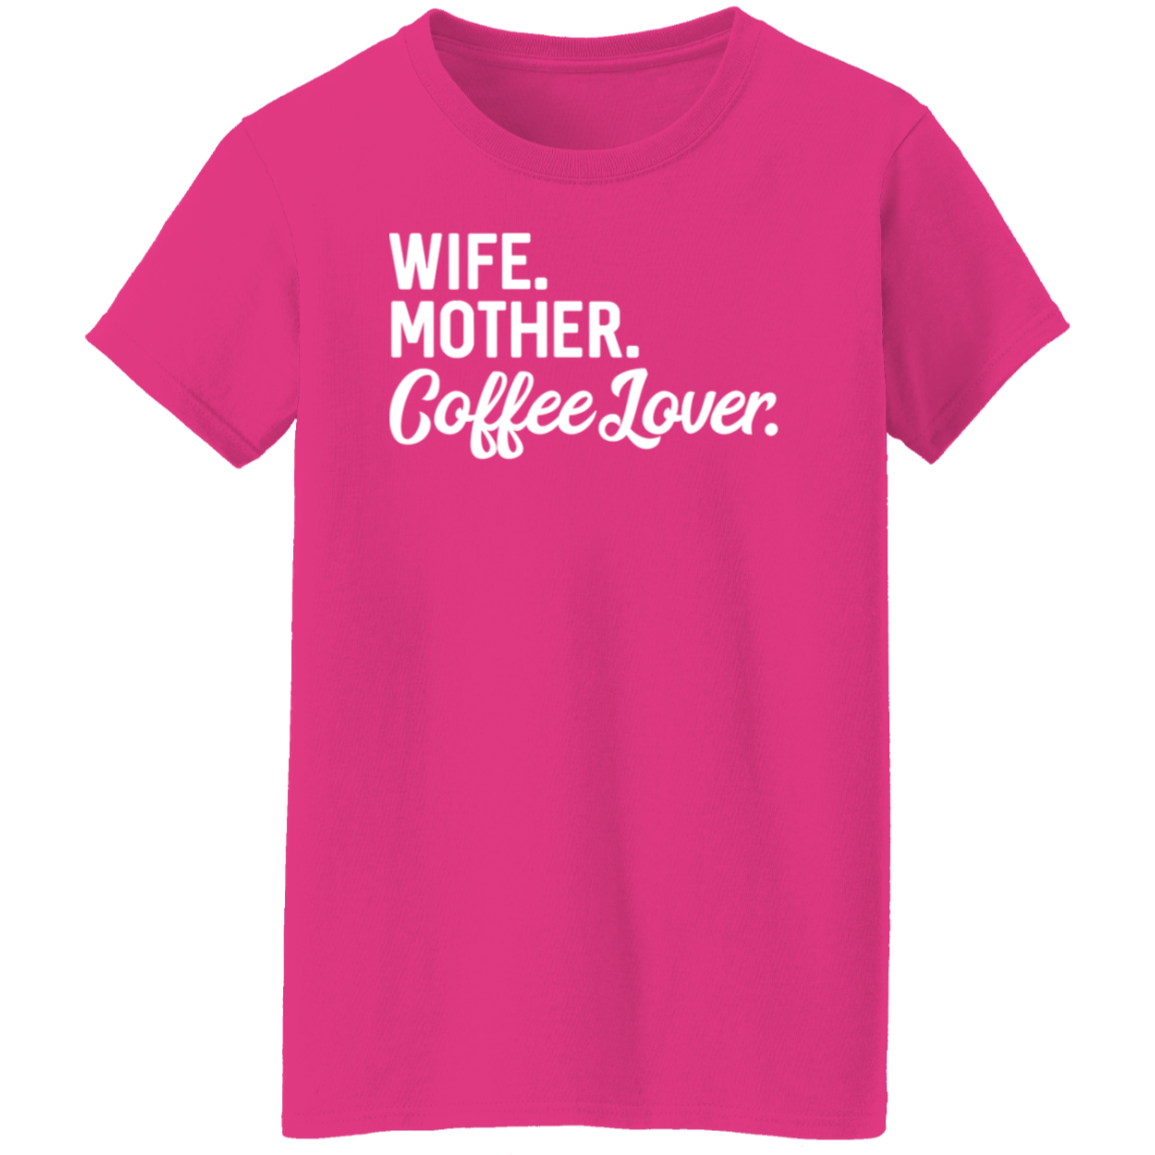 Wife, Mother, Coffee Lover T-Shirt